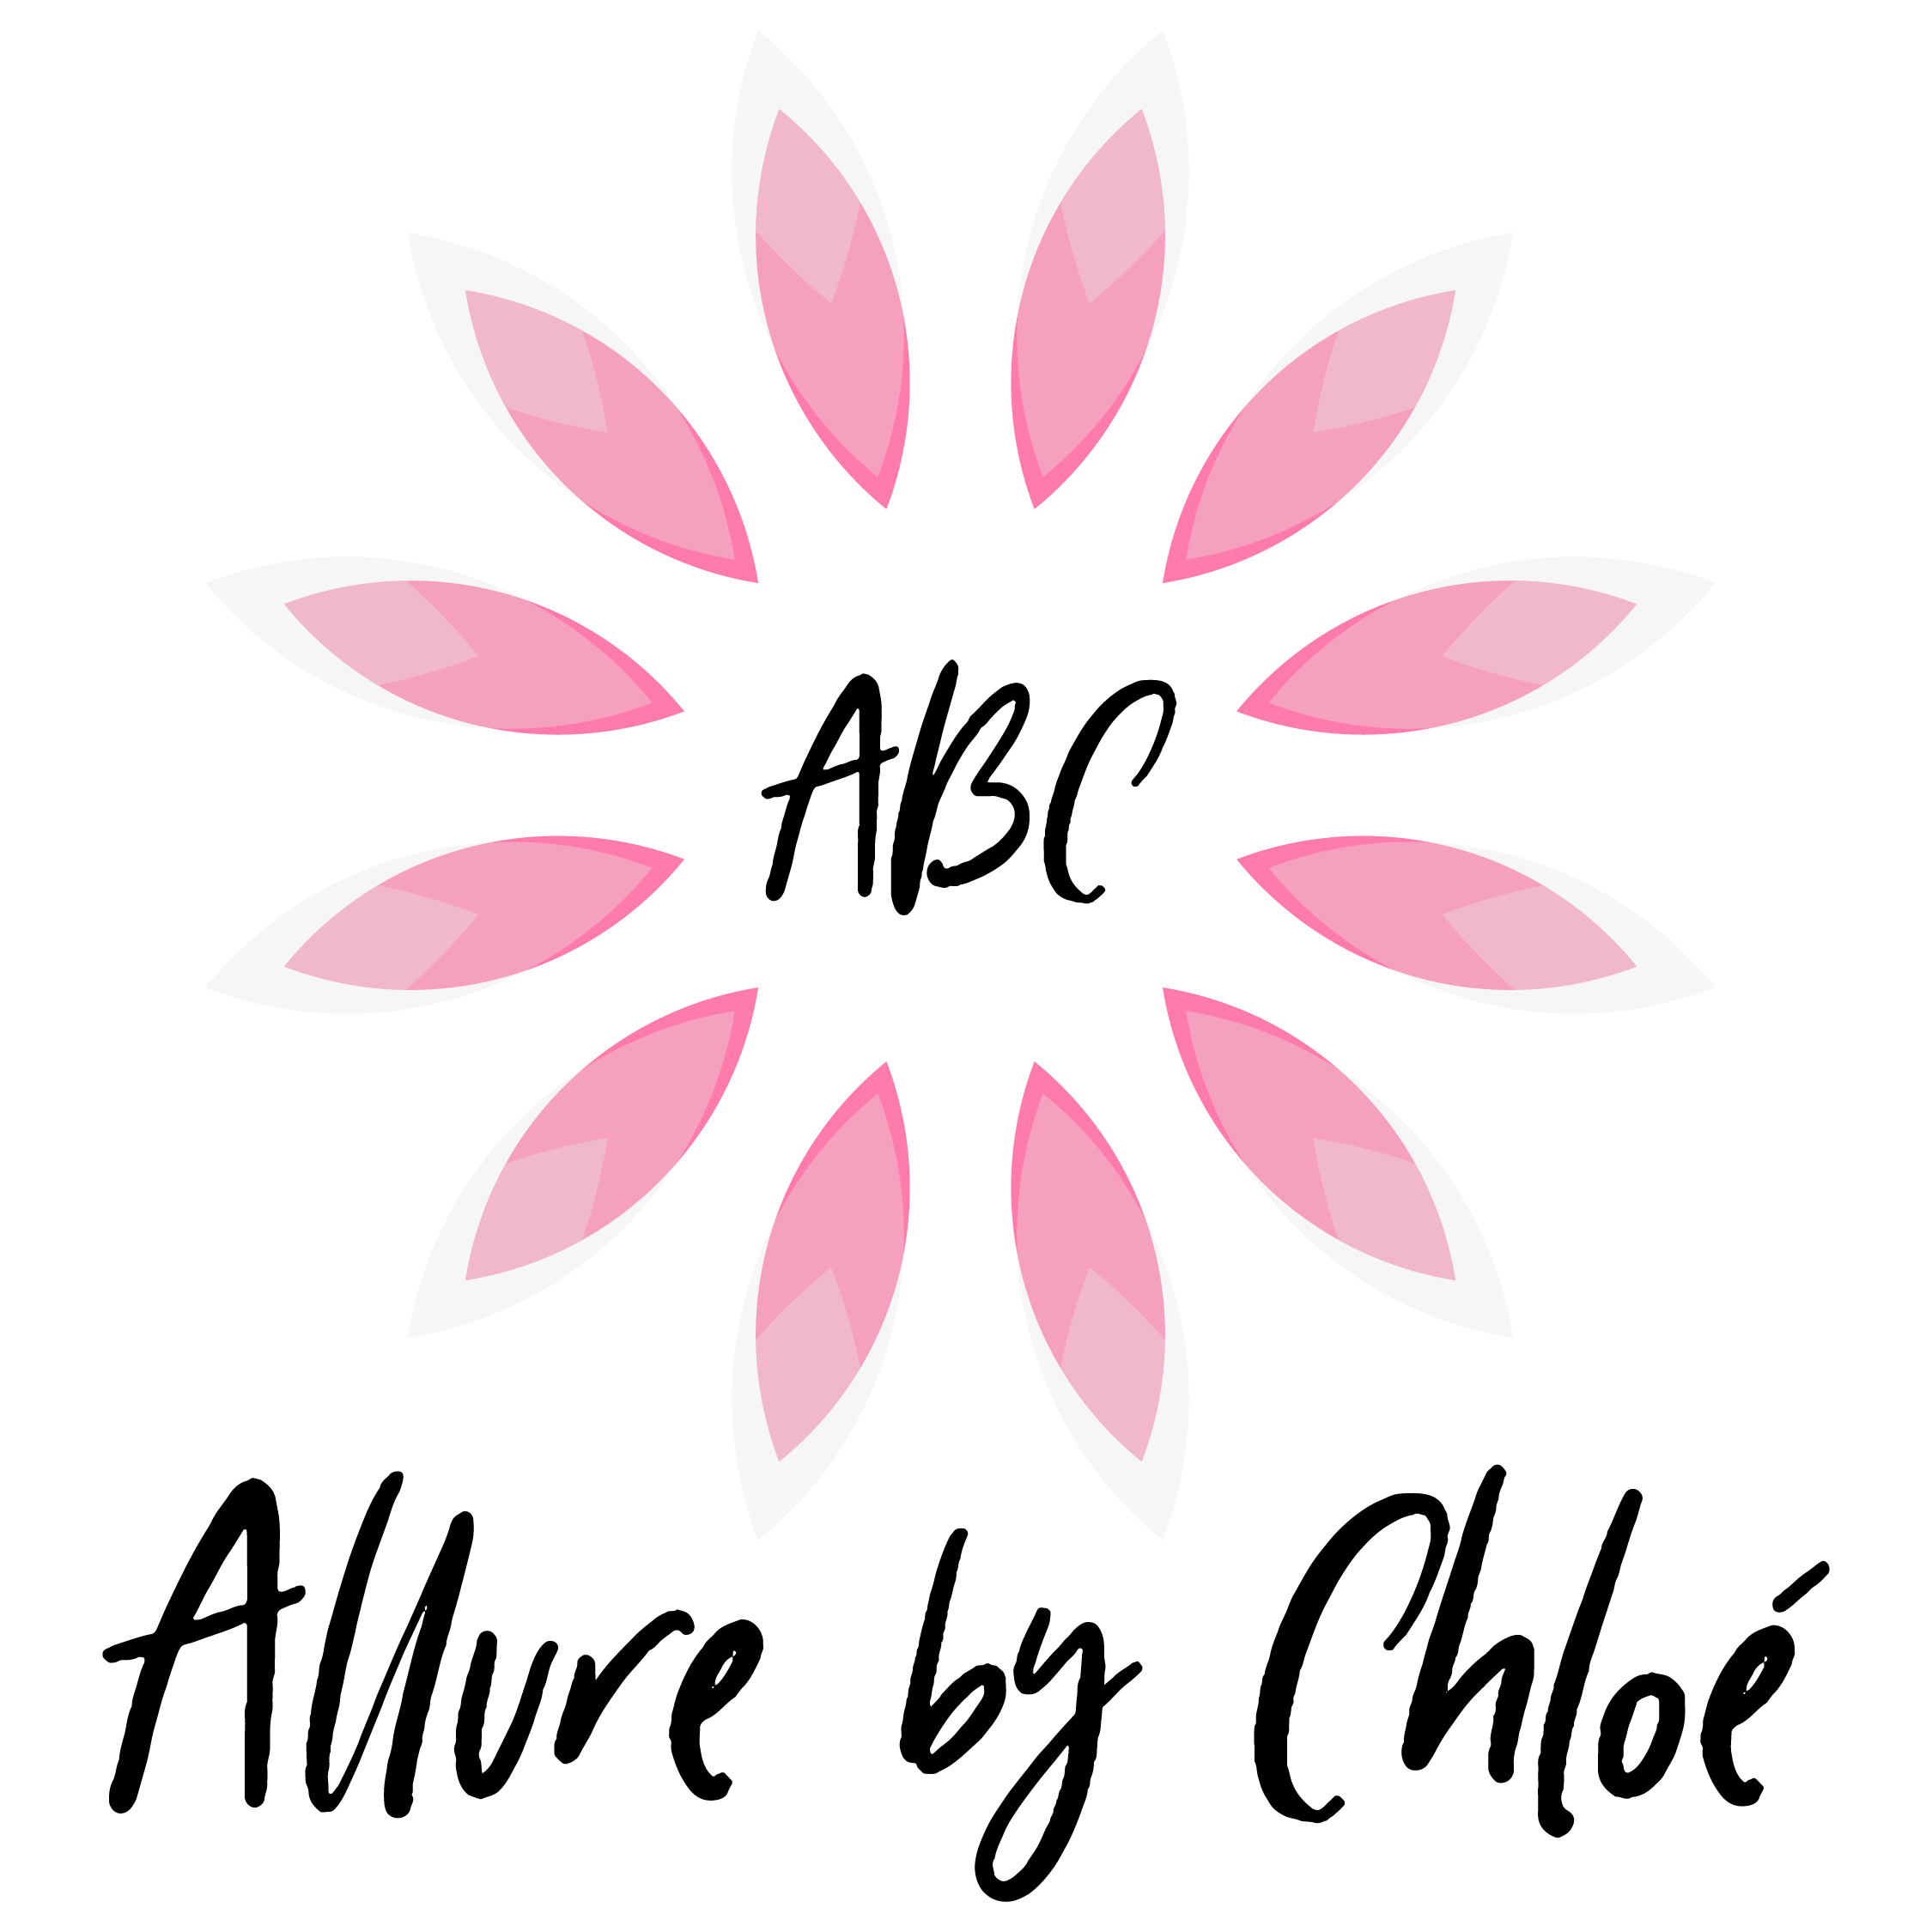 Makeup Products Logo - Allure By Chloé – Beauty & Makeup Products | Official Site